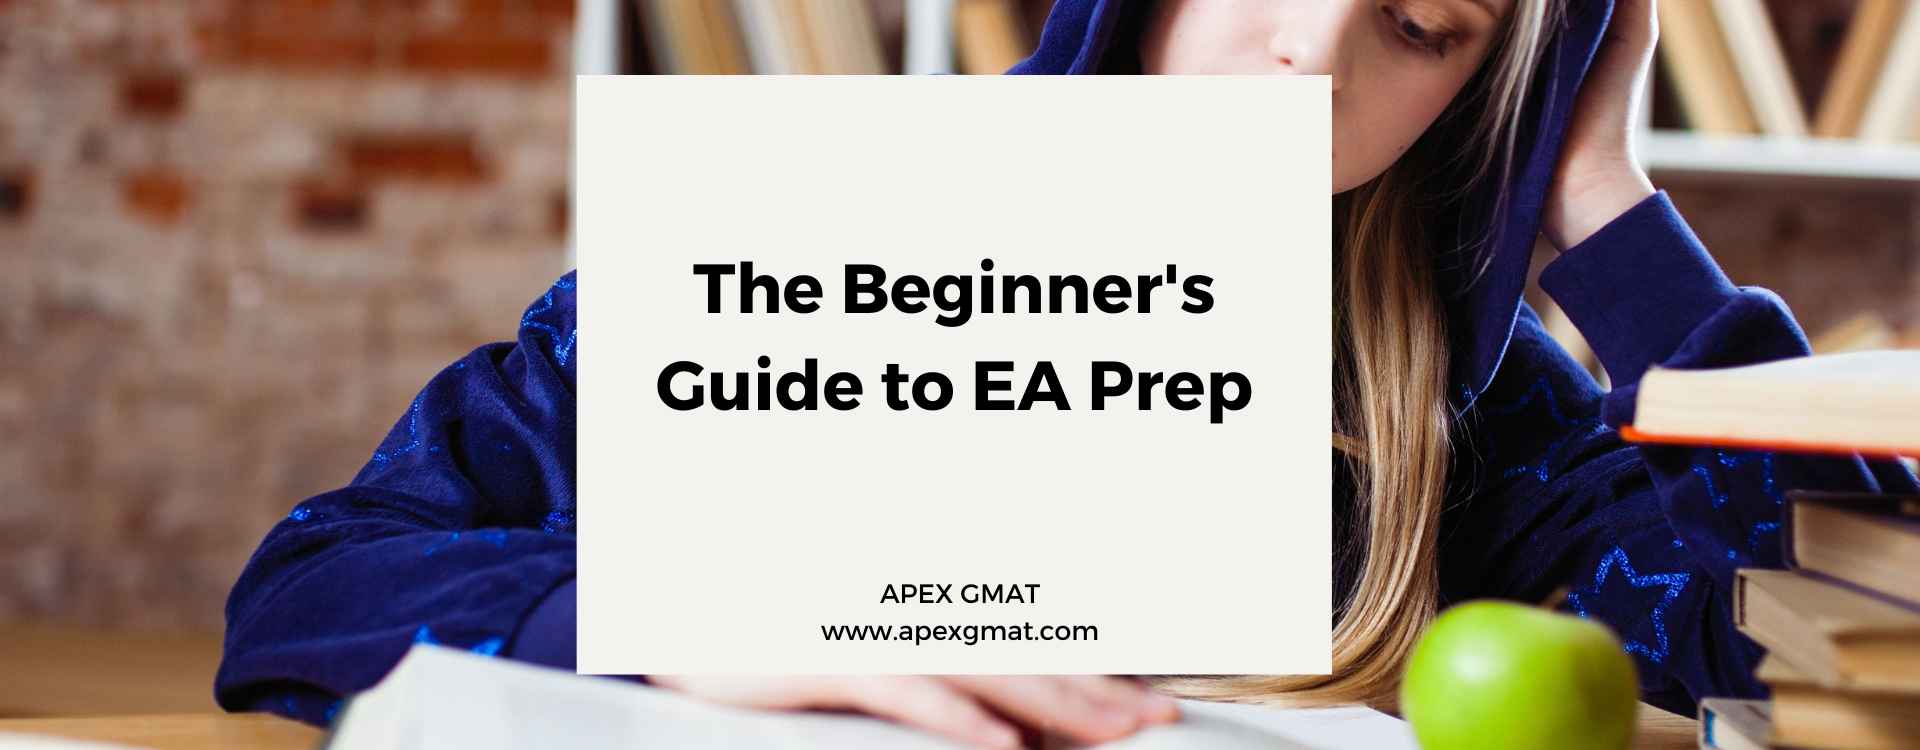 The Beginner’s Guide to EA Prep